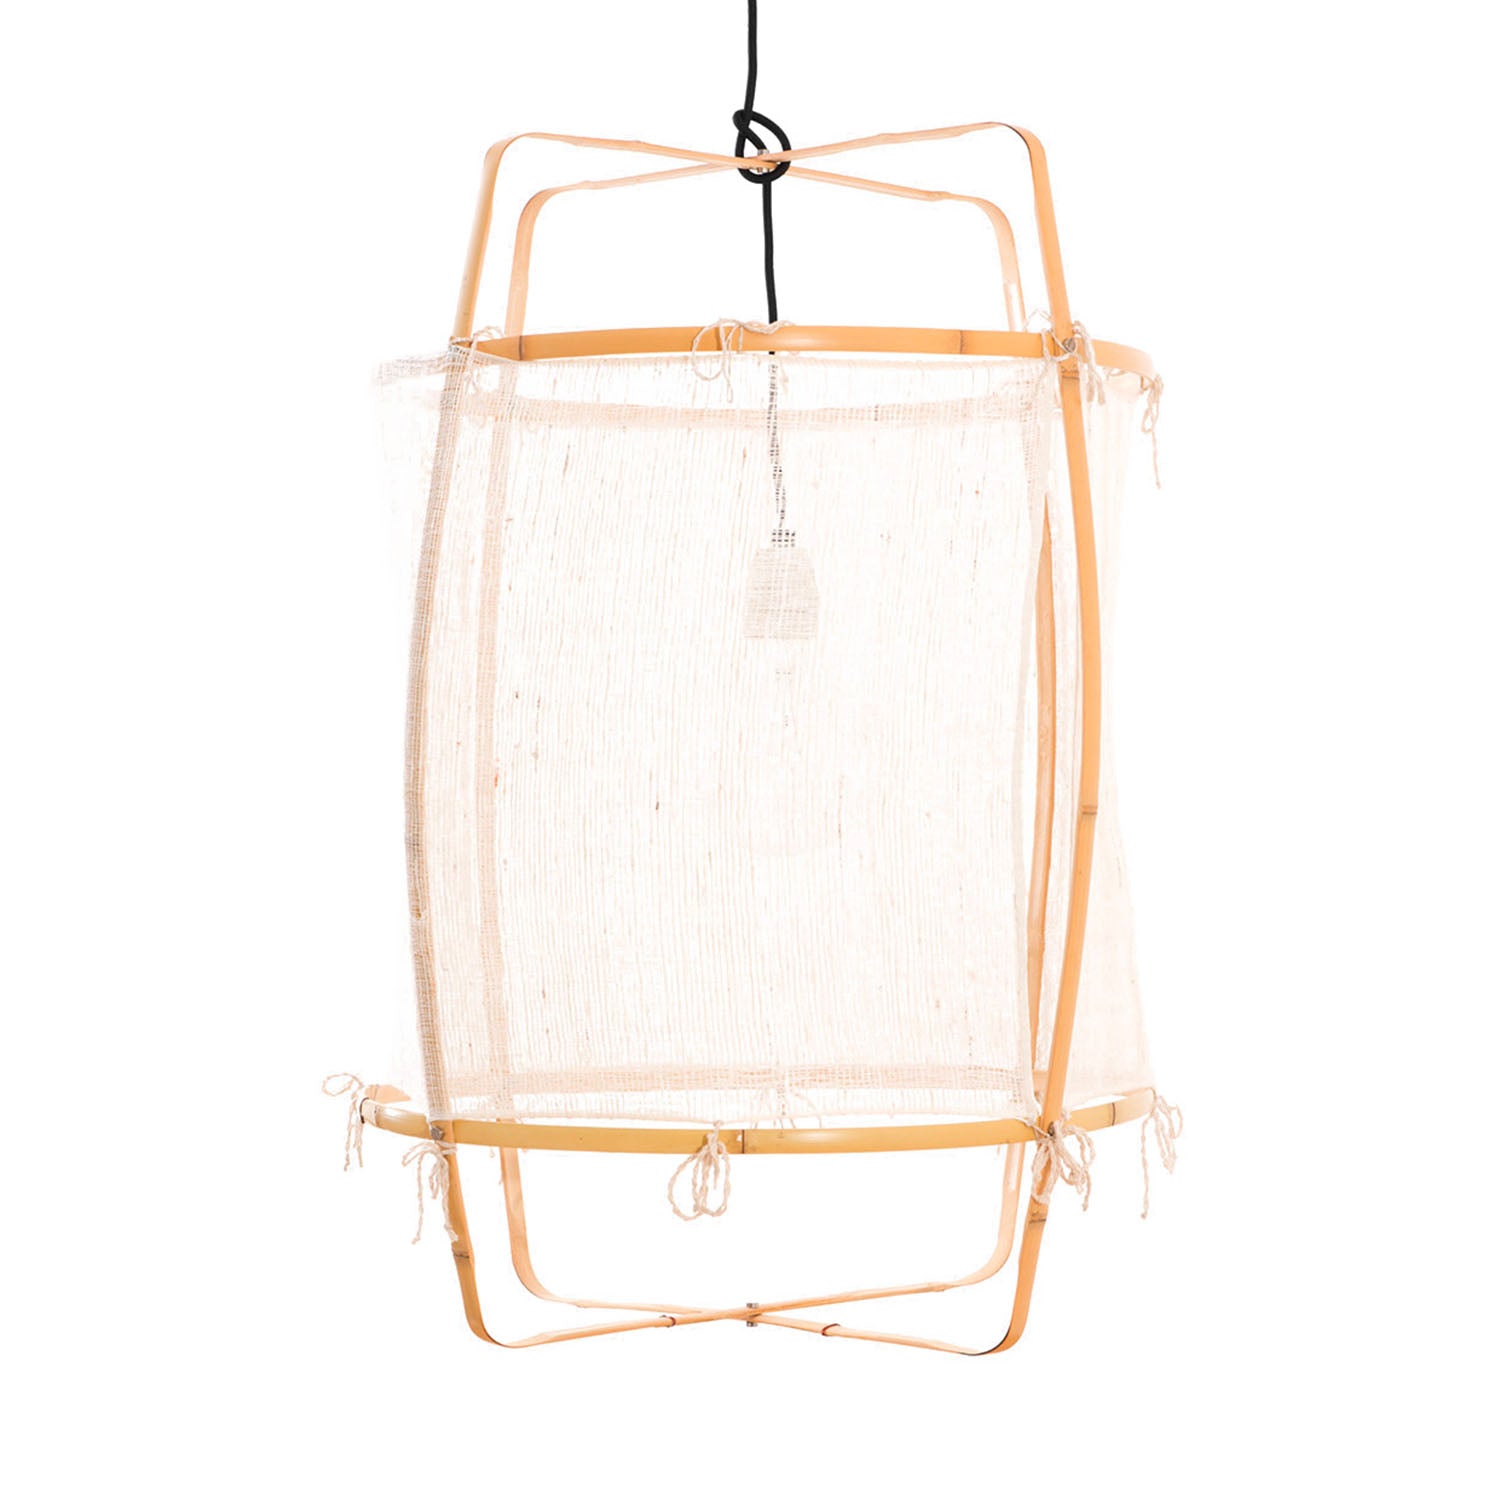 Z22 - Cage pendant light in light bamboo and white or black silk